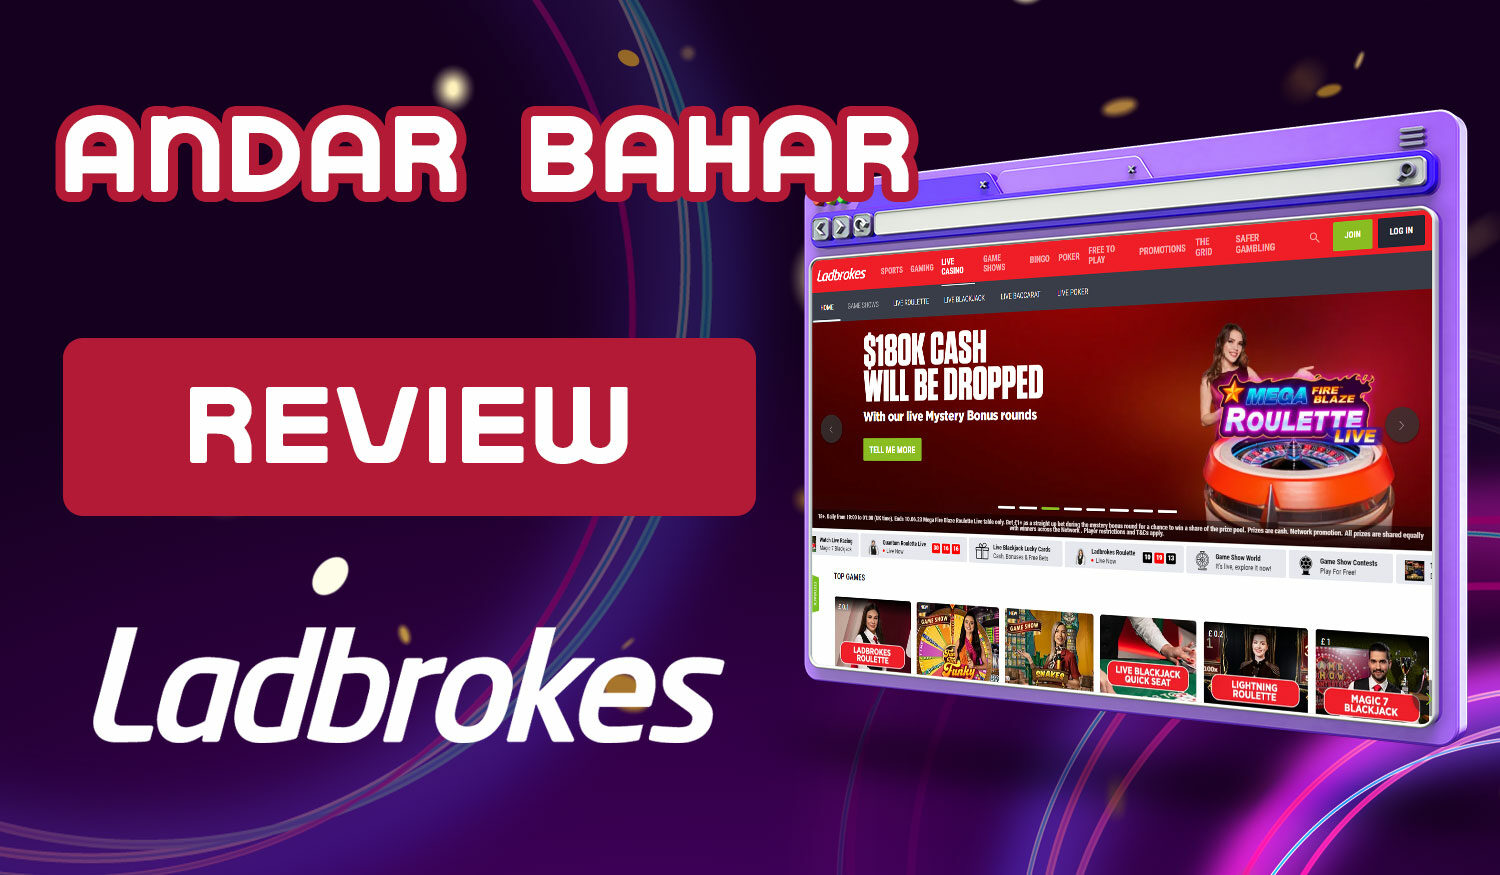 Review of the bookmaker Ladbrokes on Andar Bahars